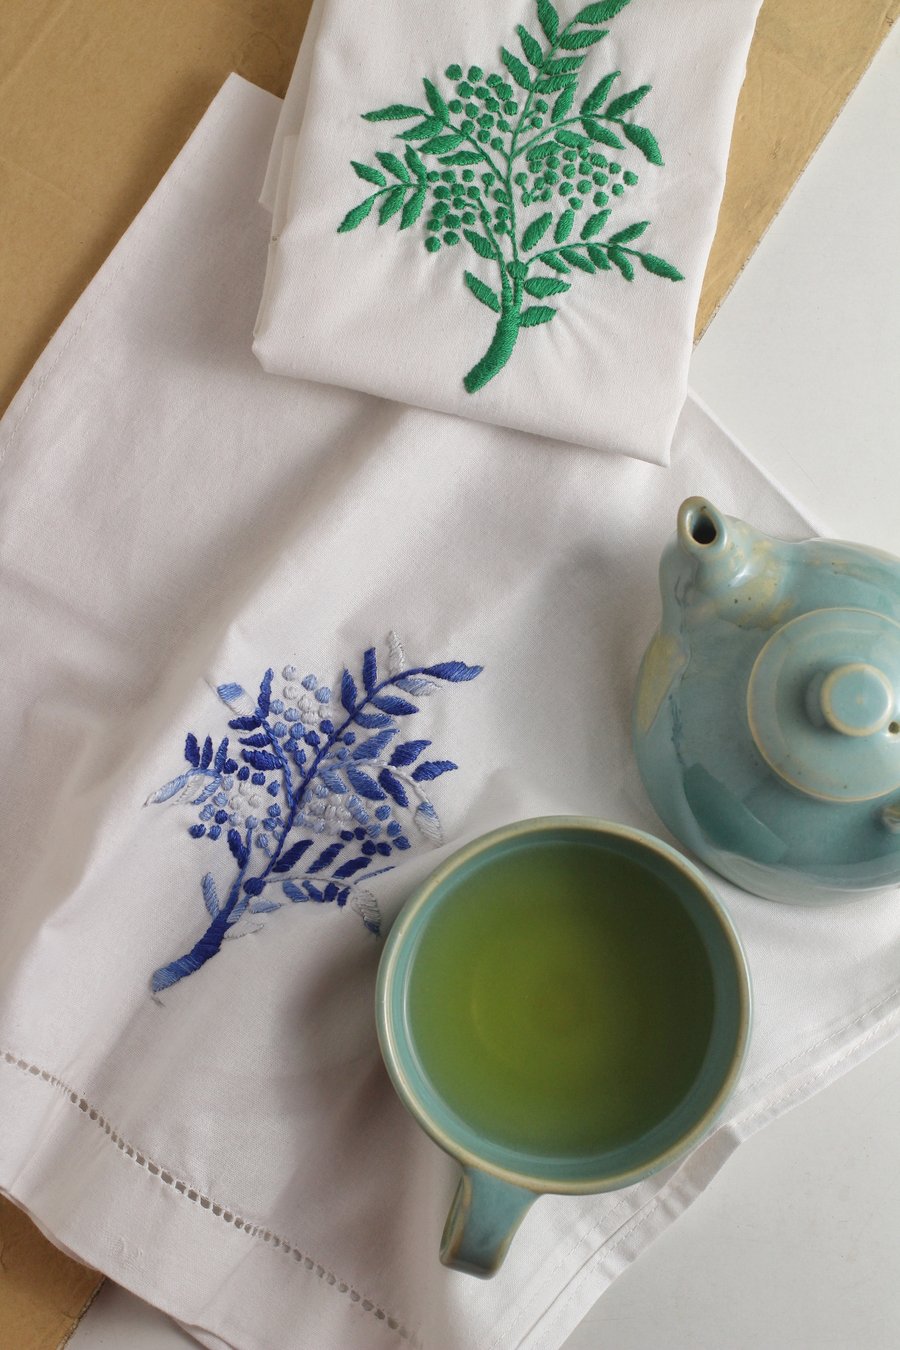 Hand Embroidered Tea Towels - Set of 2